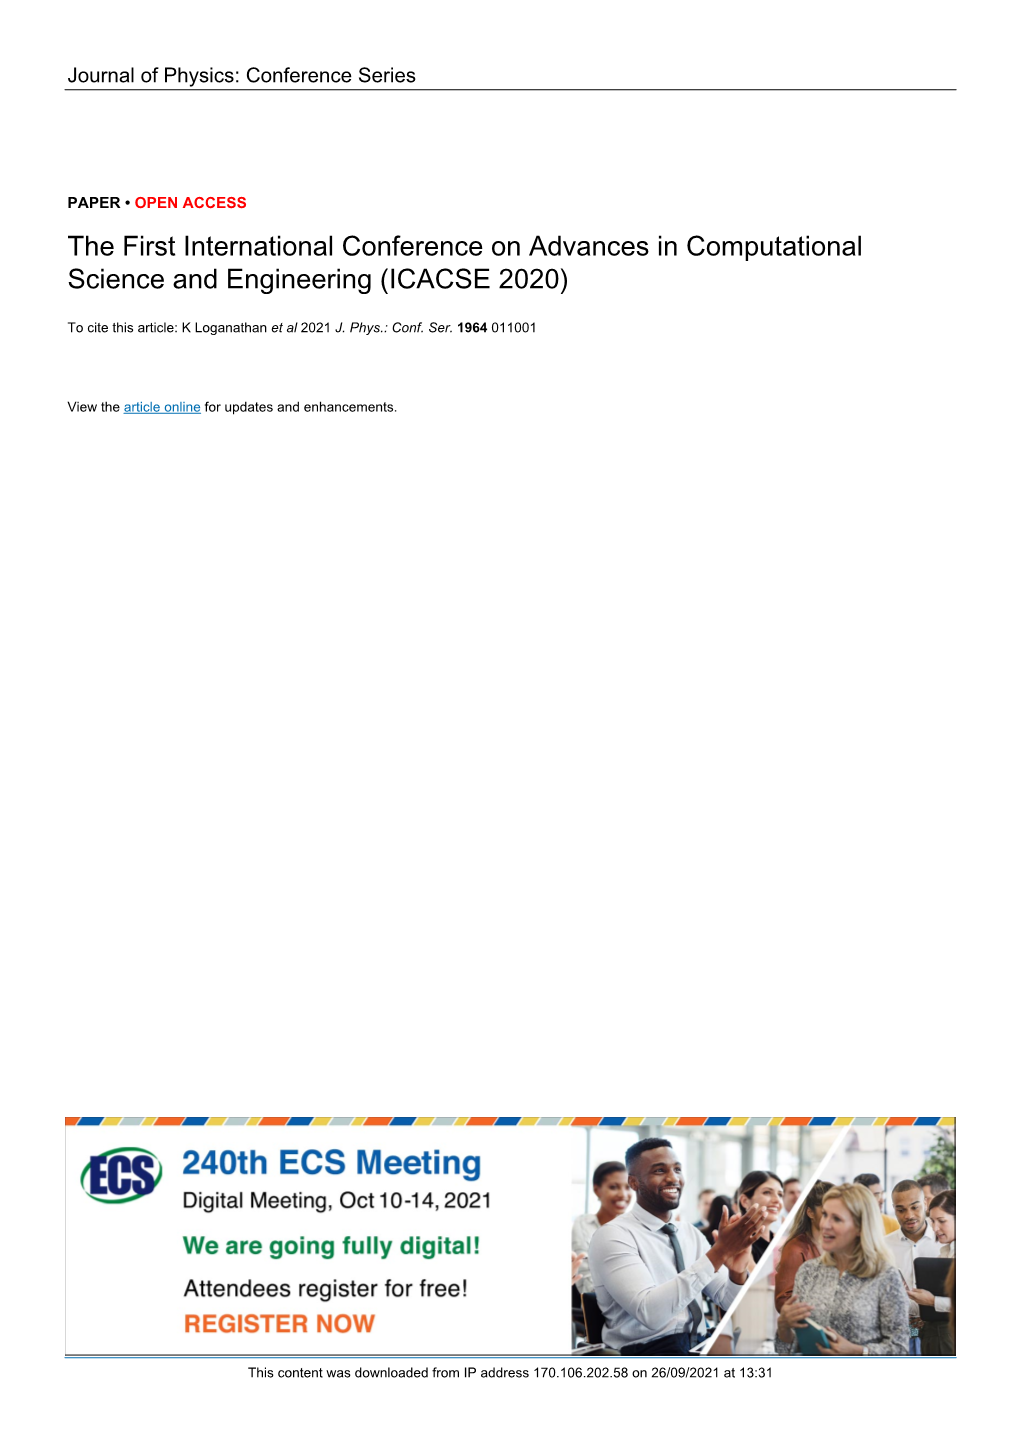 The First International Conference on Advances in Computational Science and Engineering (ICACSE 2020)